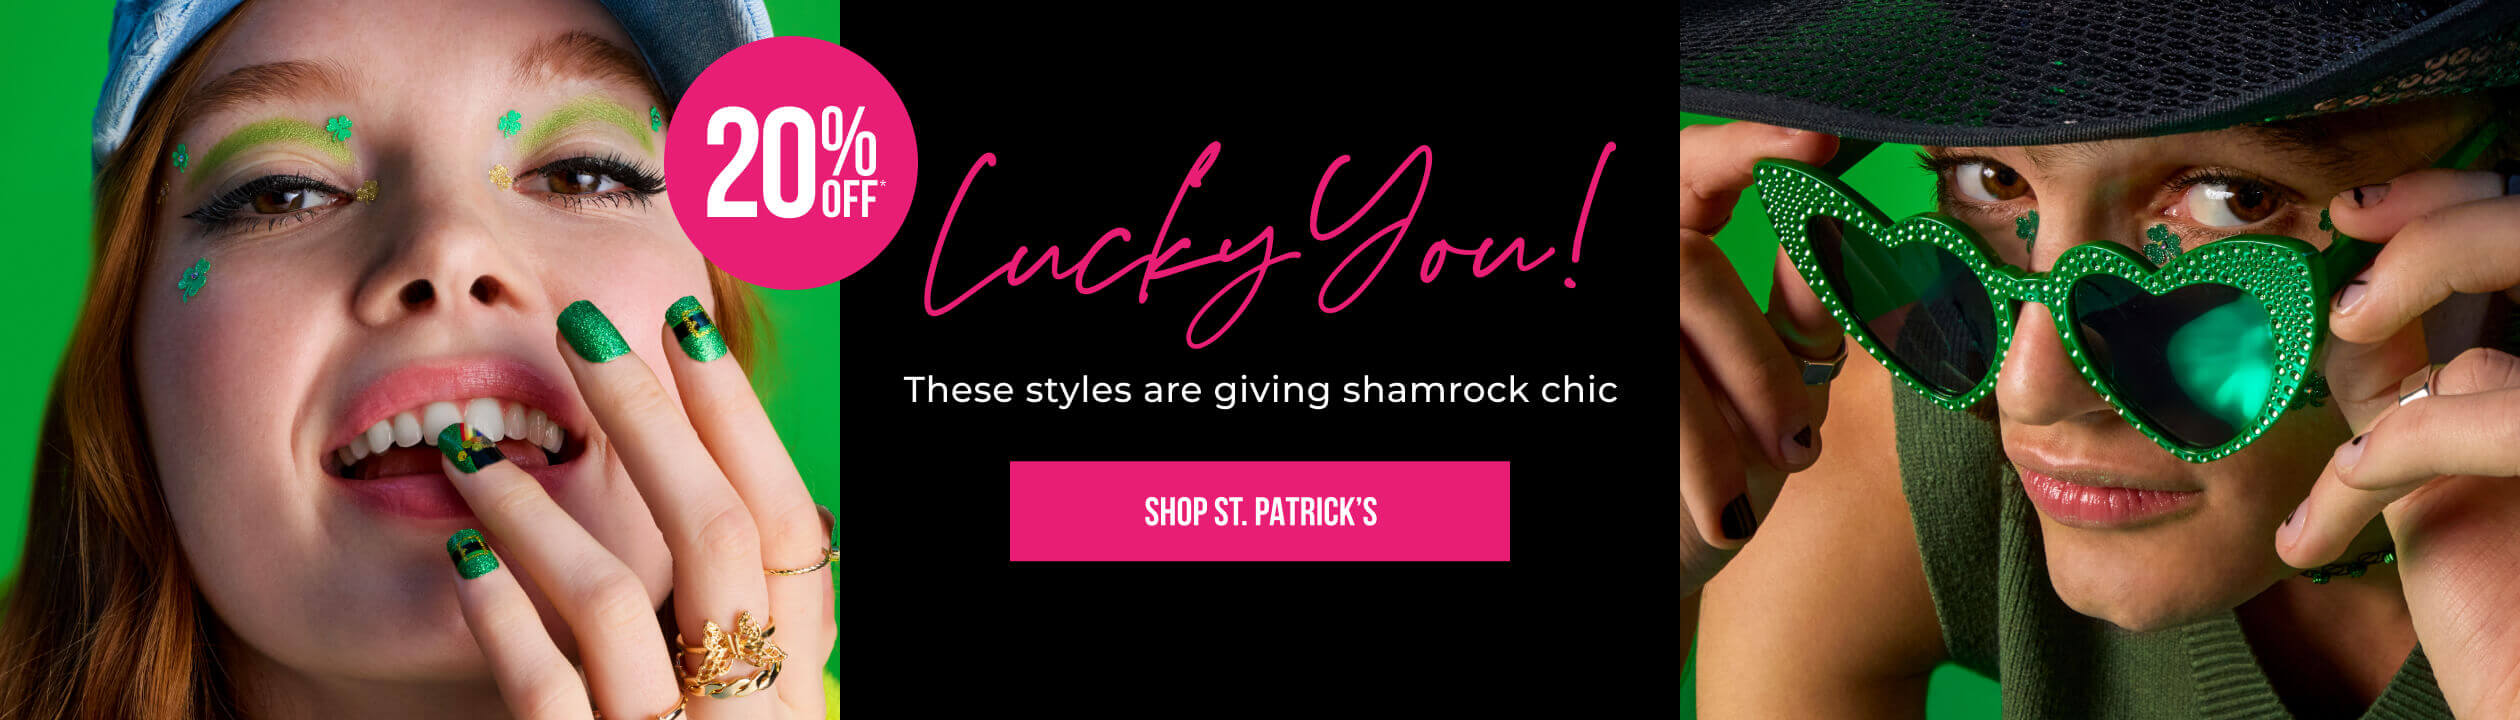 Lucky You! These styles are giving shamrock chic